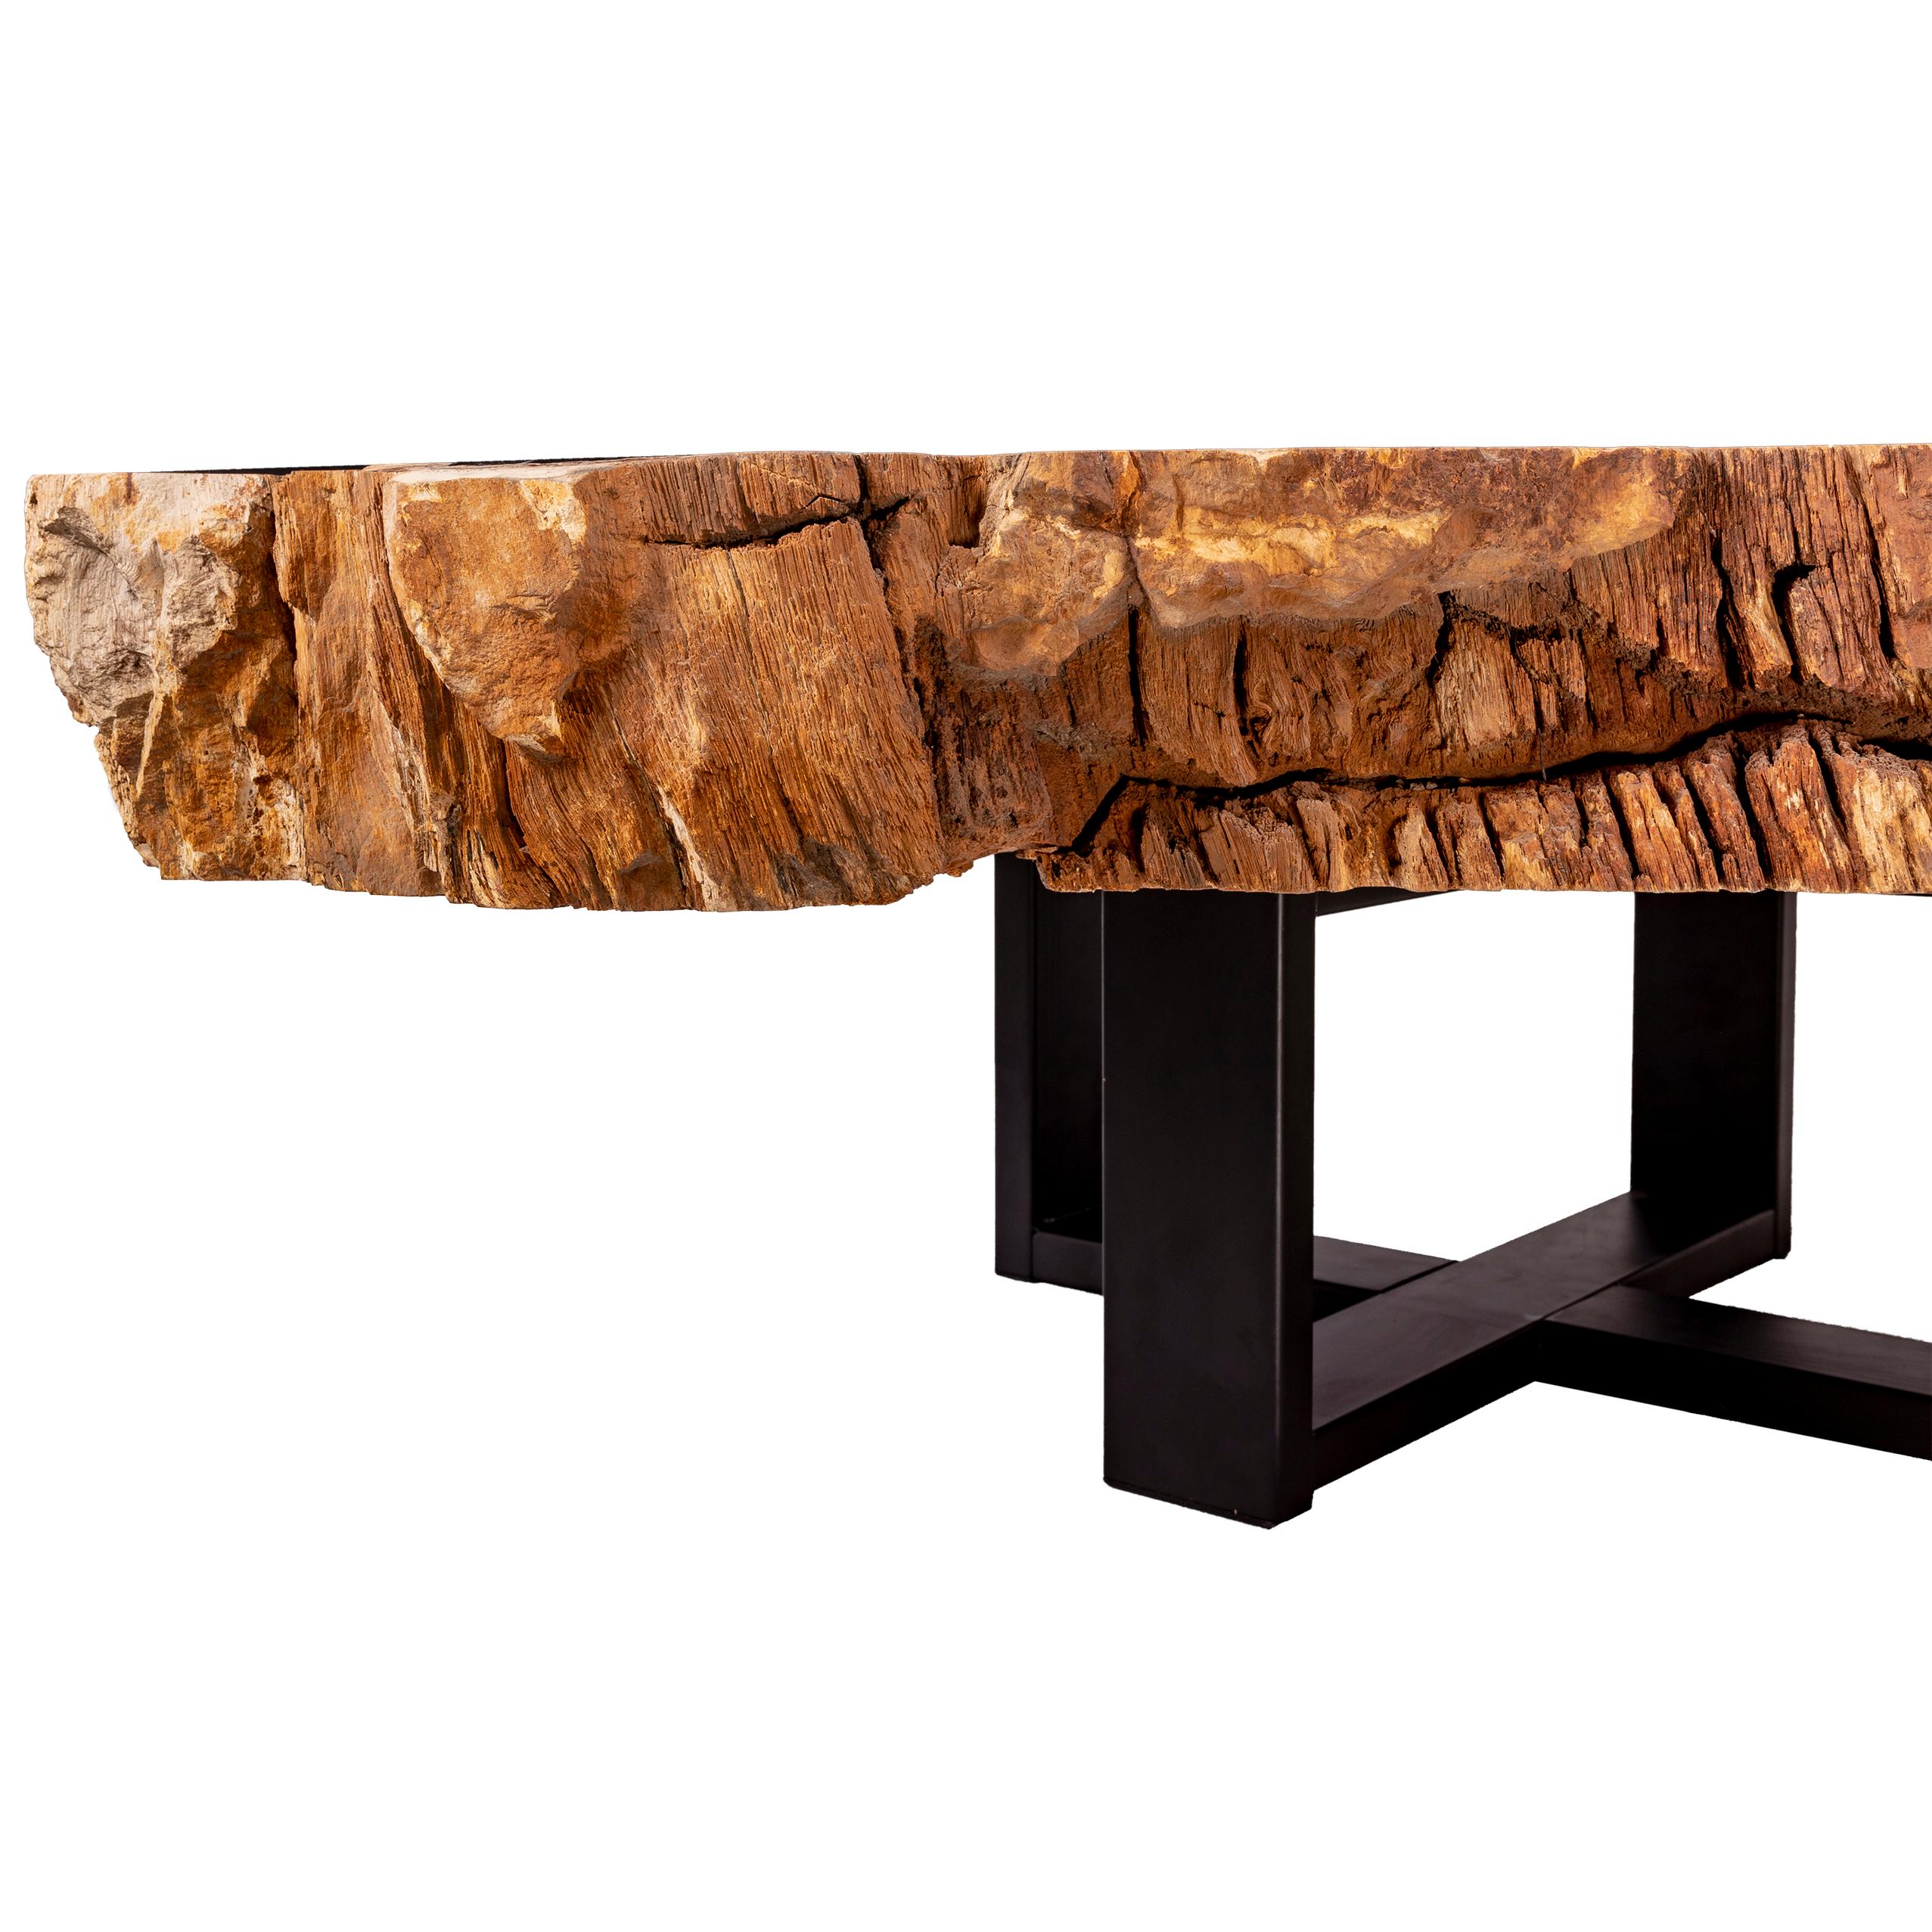 Center of Coffee Table, Natural Circular Shape, Petrified Wood with Metal Base 4